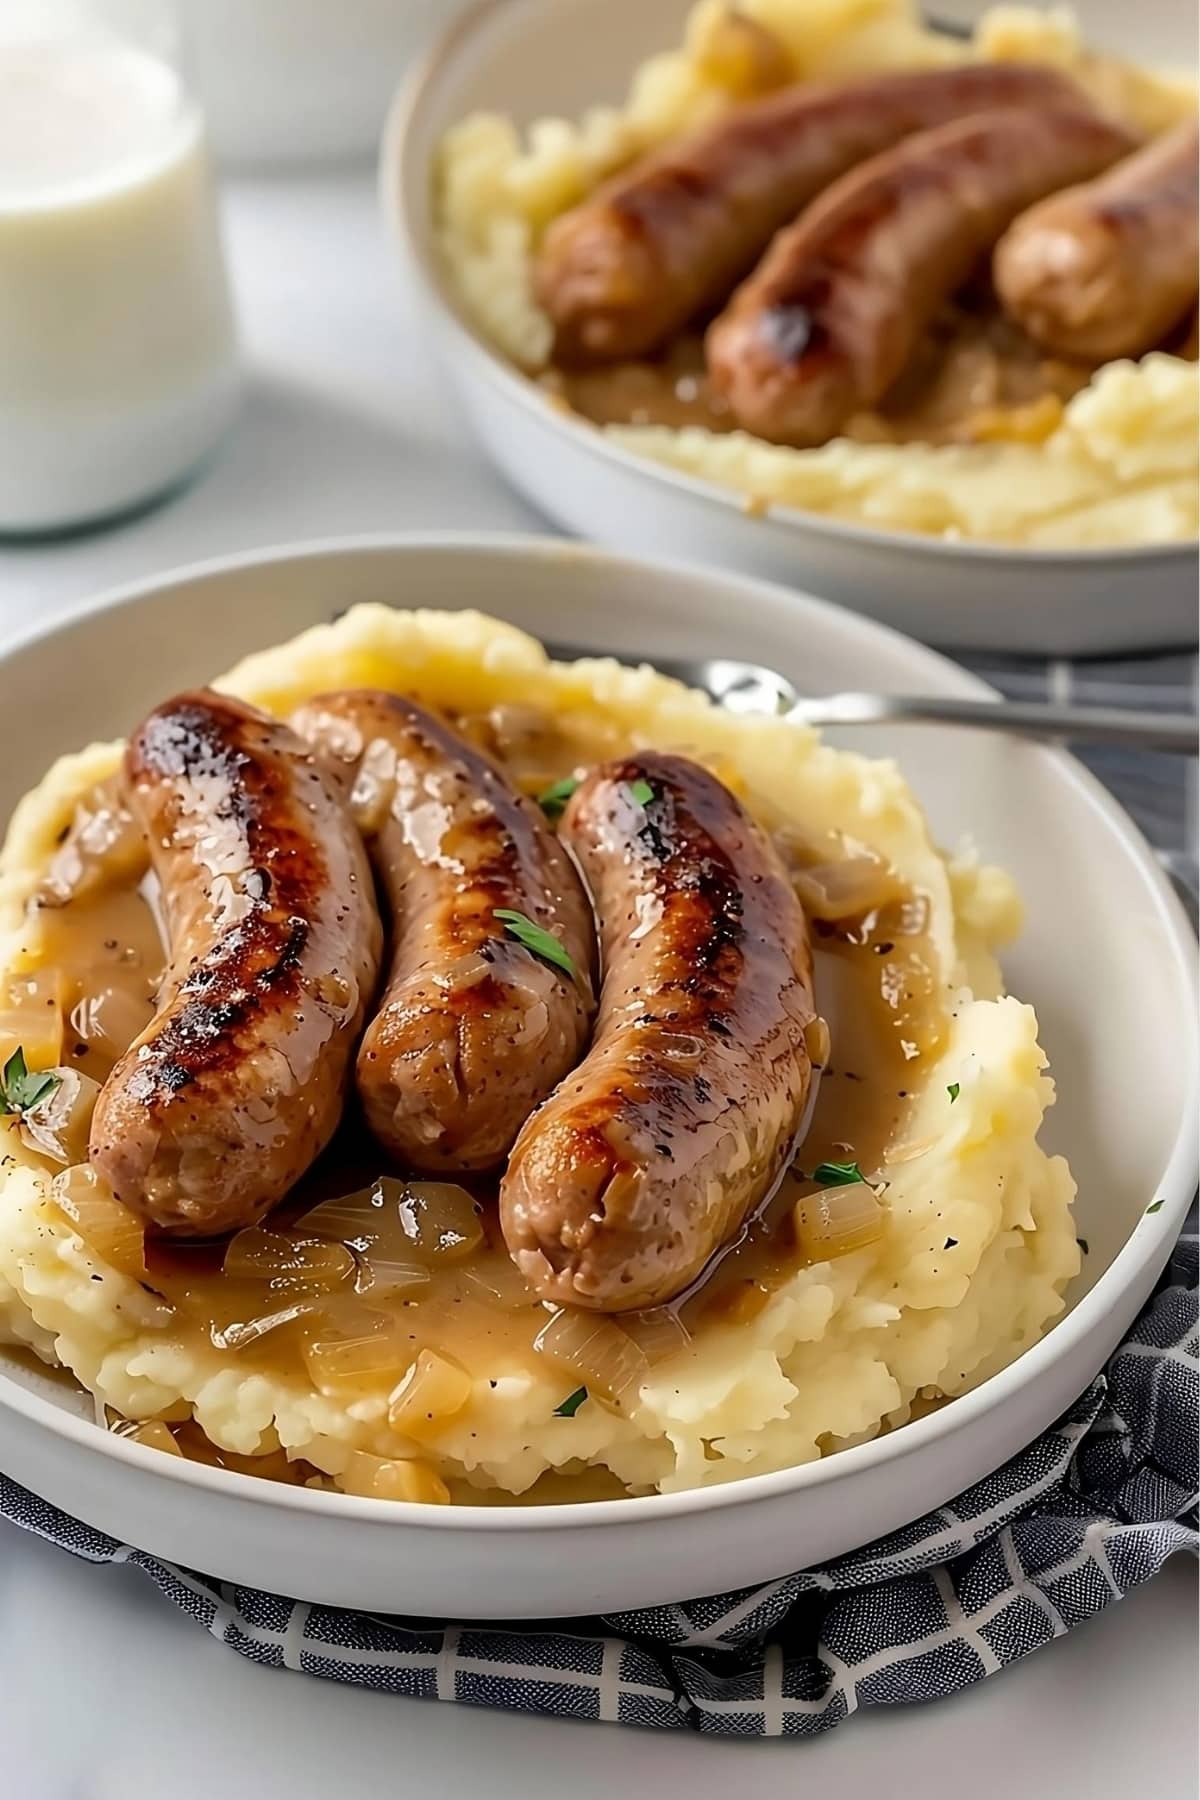 Mashed potato in bowls topped with sausage and onion gravy.